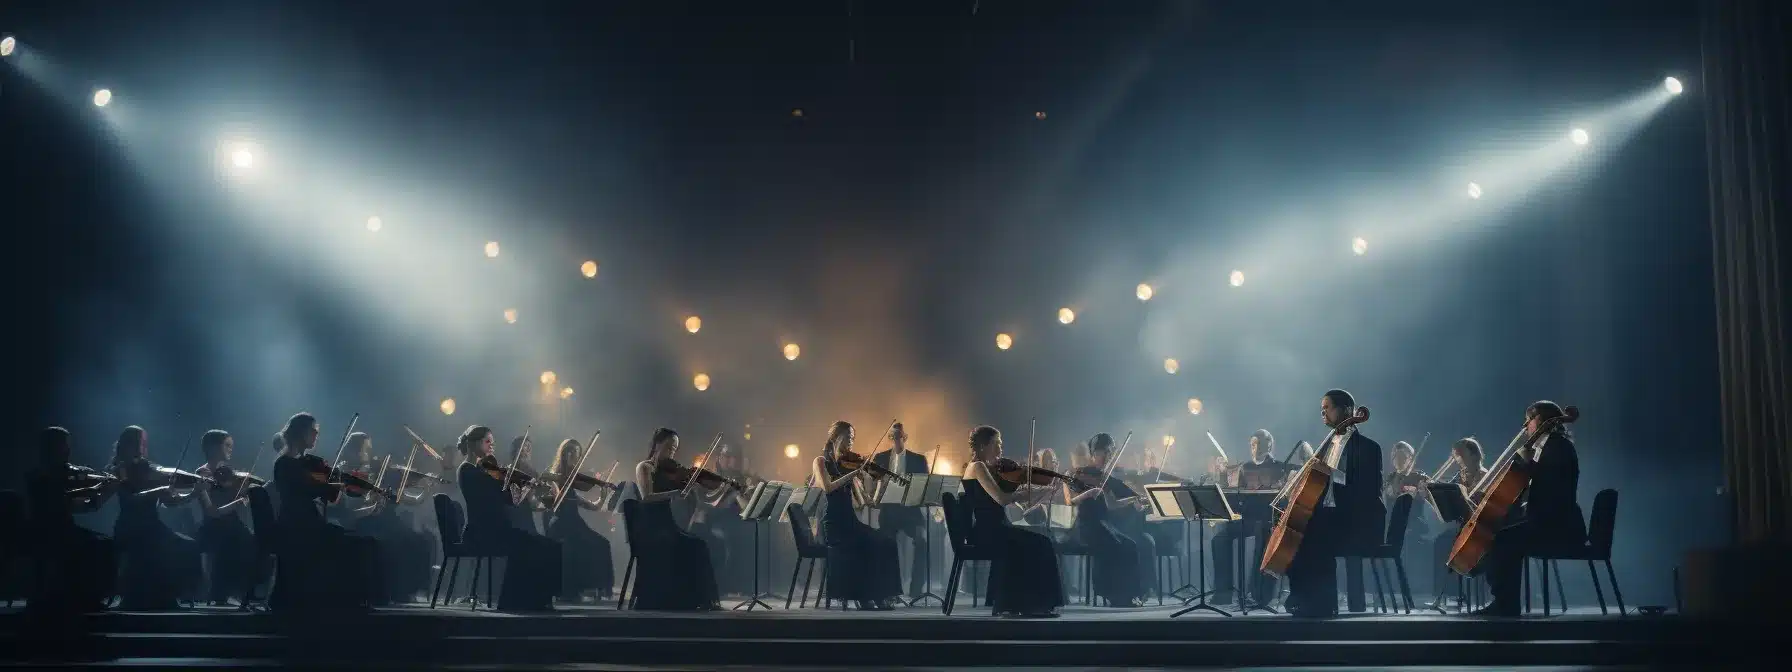 A Symphony Orchestra Playing Together In Perfect Harmony.